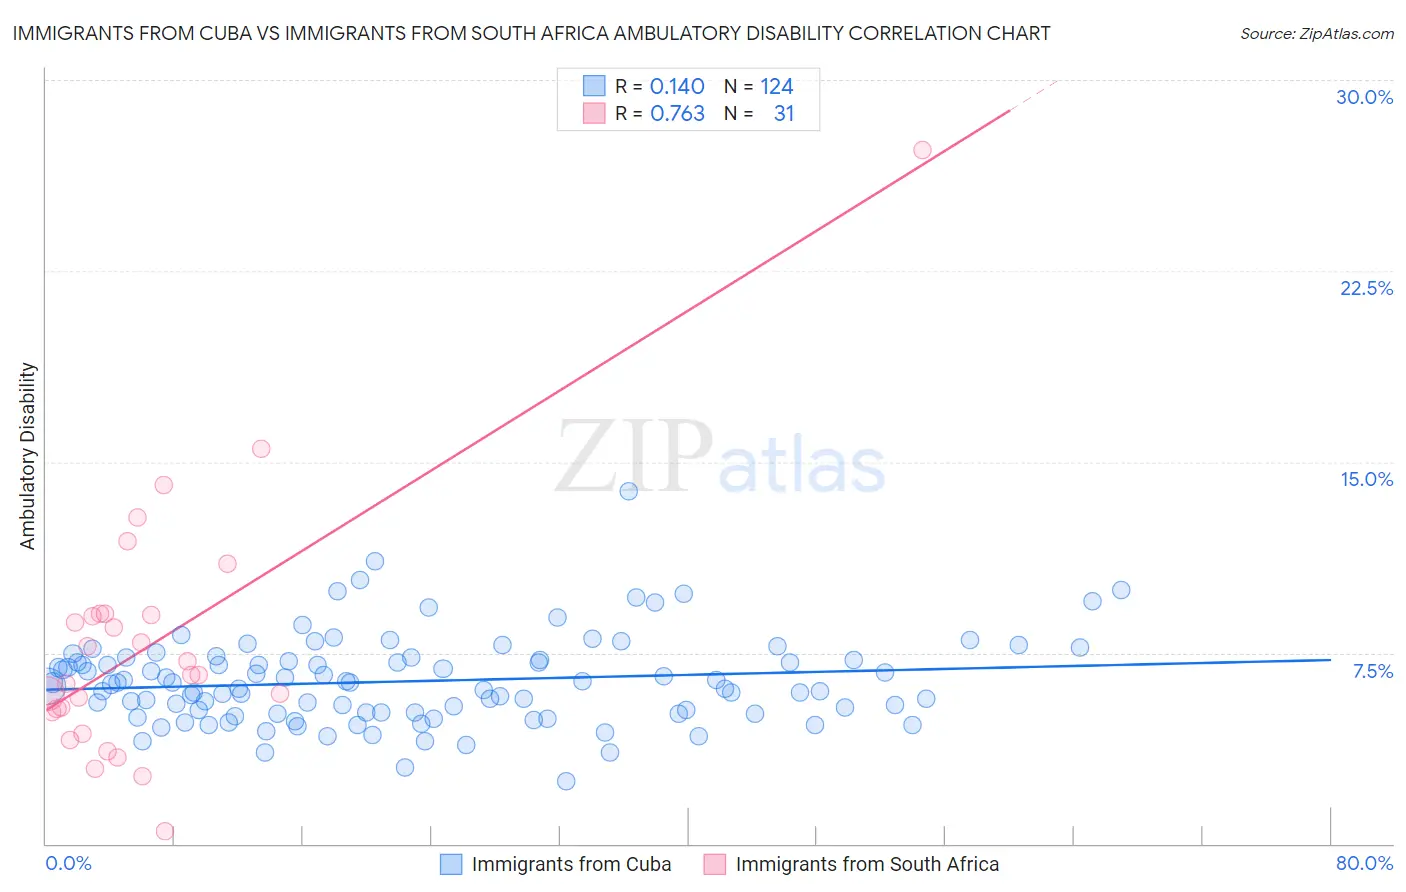 Immigrants from Cuba vs Immigrants from South Africa Ambulatory Disability